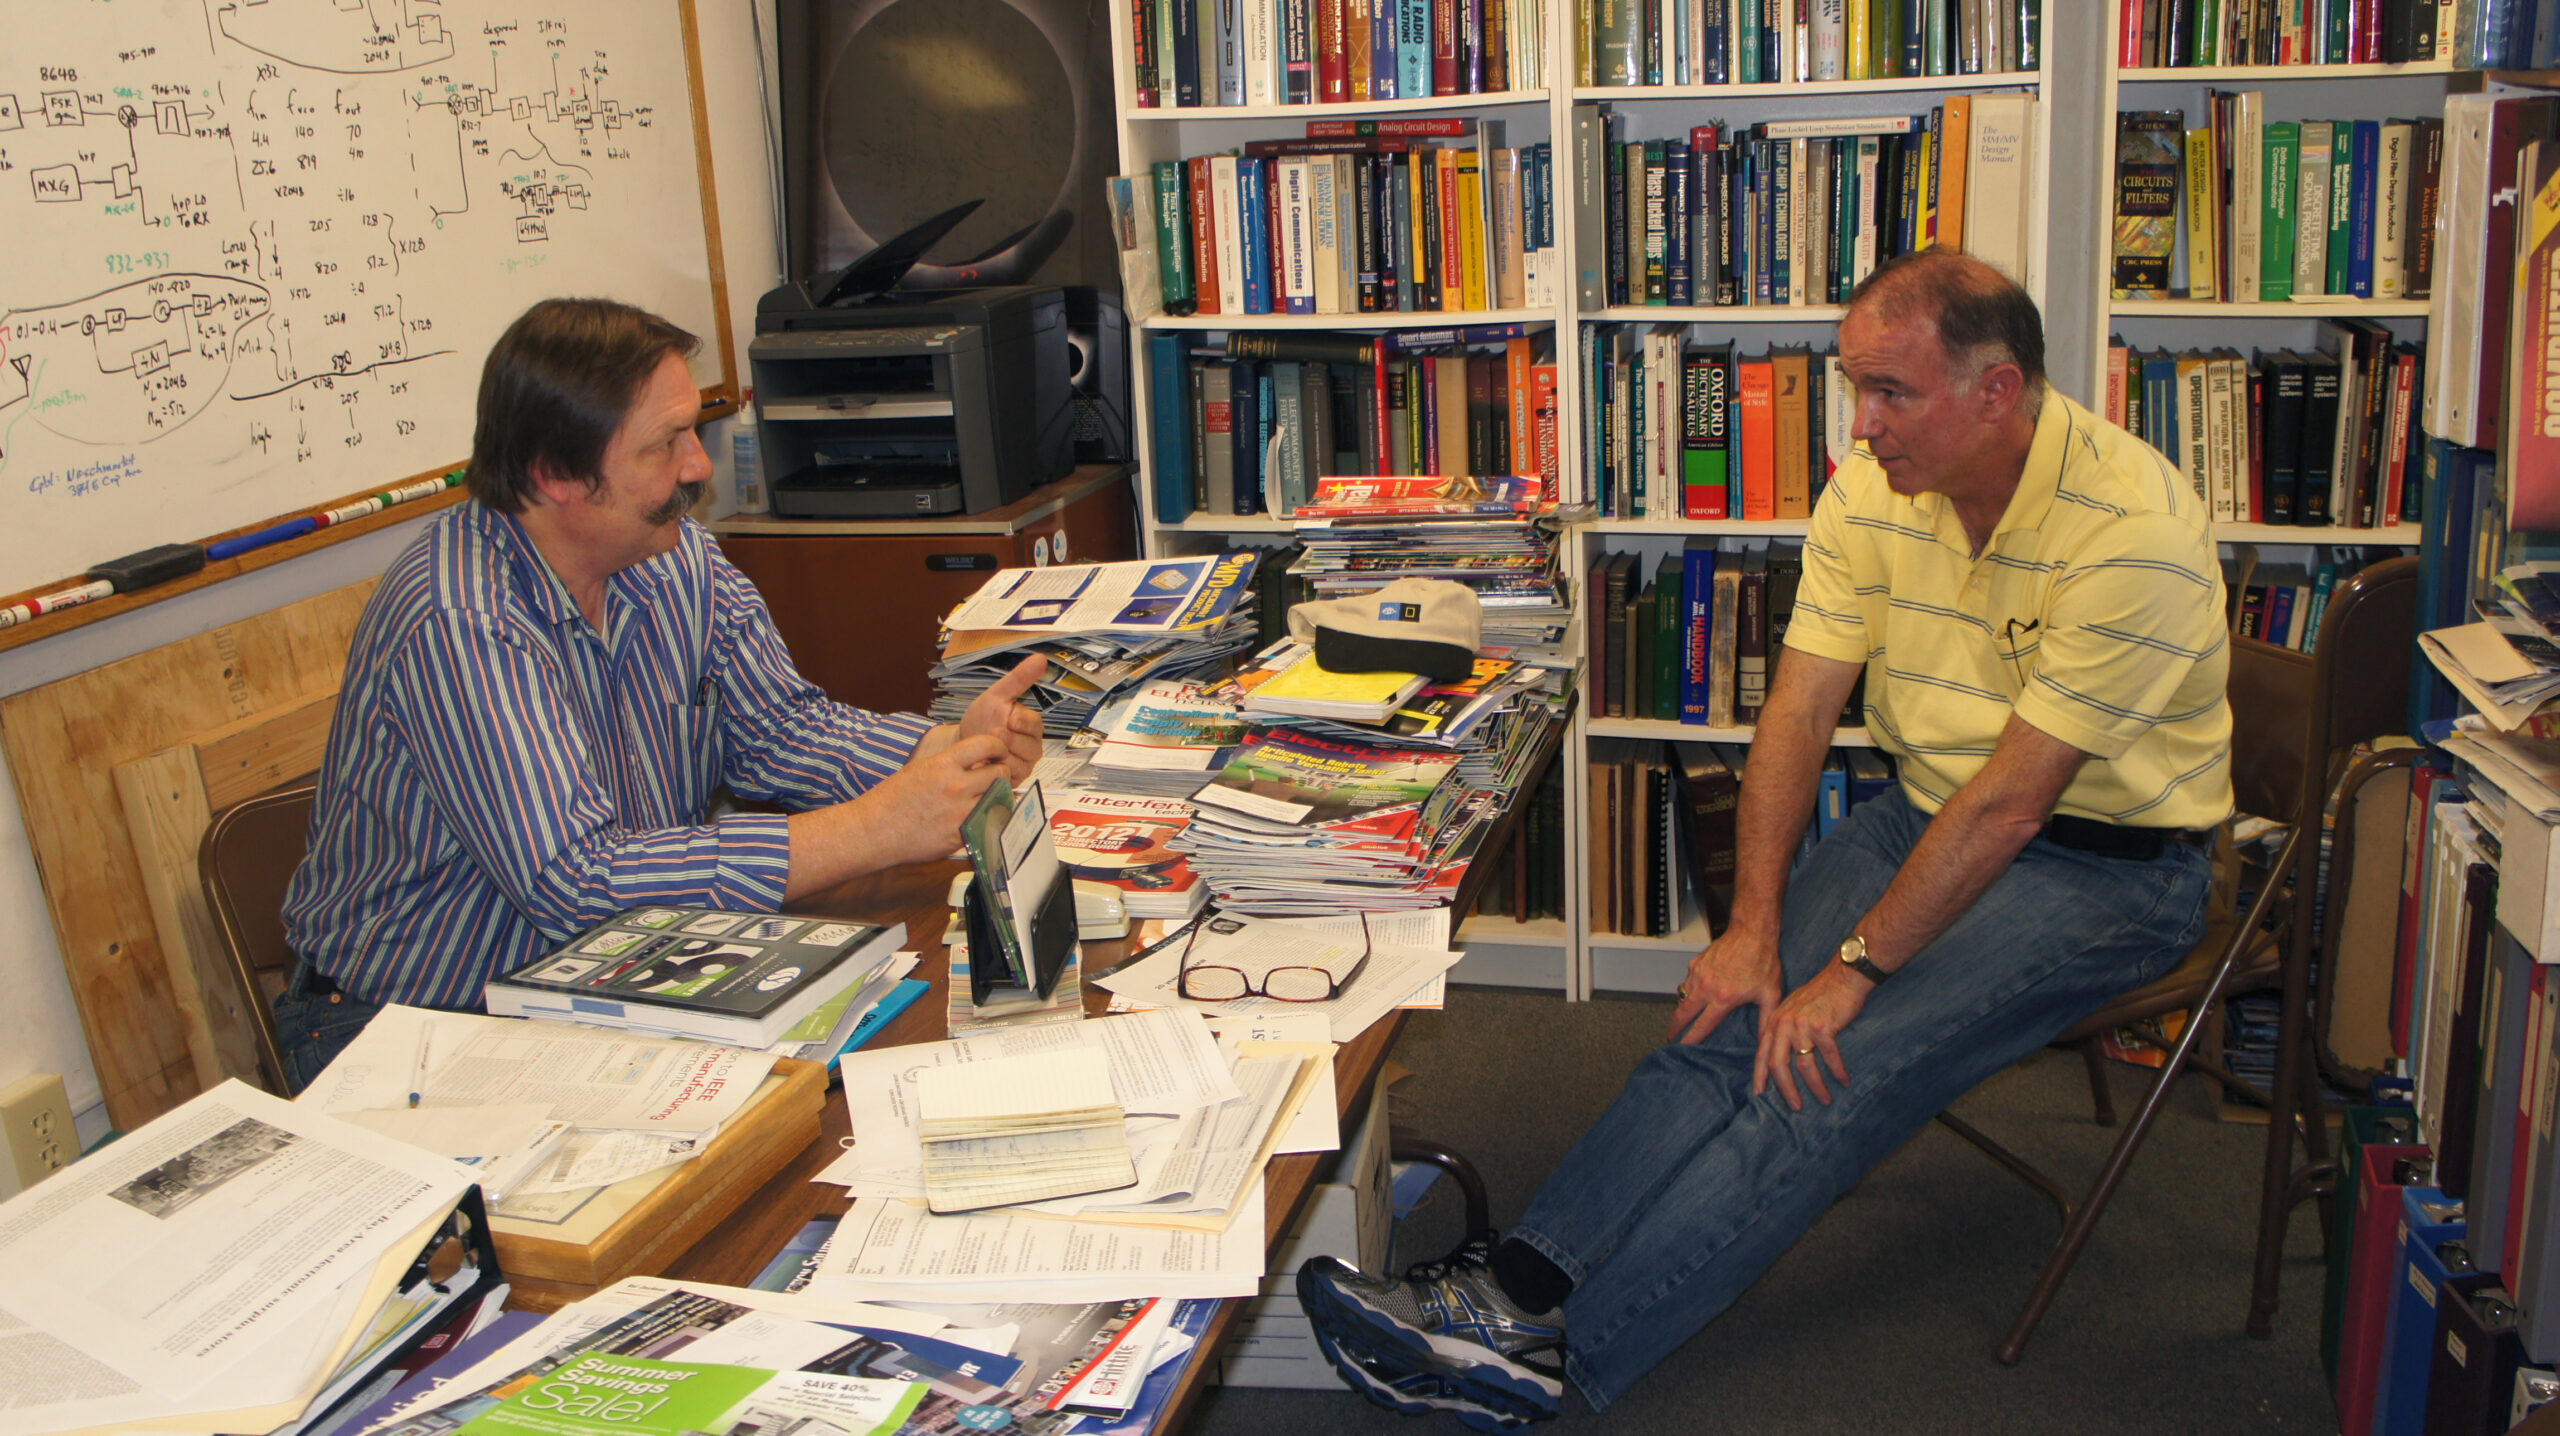 doug (wearing a yellow shirt) and earl (wearing a blue button down) sit down in an office, talking.